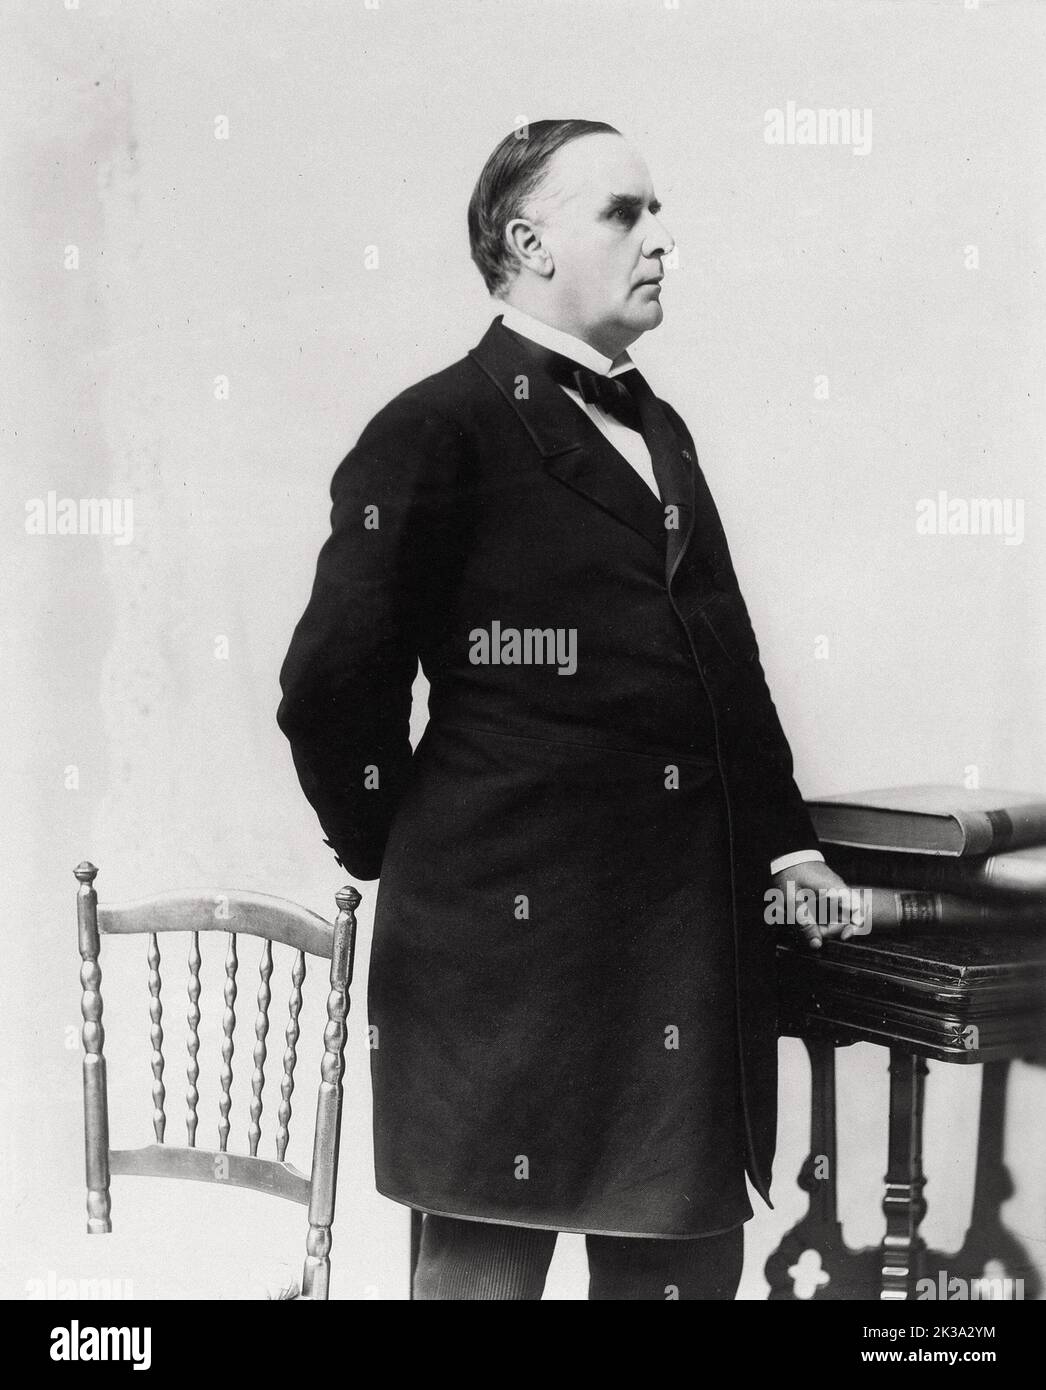 An 1894 portrait of US President William McKinley, when KcKinley was 51 yrs old. McKinley was the 25th president of the USA, and the third of four to be assassinated. He was shot by Leon Czolgosz on 6th September 1901. Like James Garfield, McKinley briefly recovered from the wounds, to die of sepsis some time later. In this engraving he is seen as a presidential candidate. Stock Photo